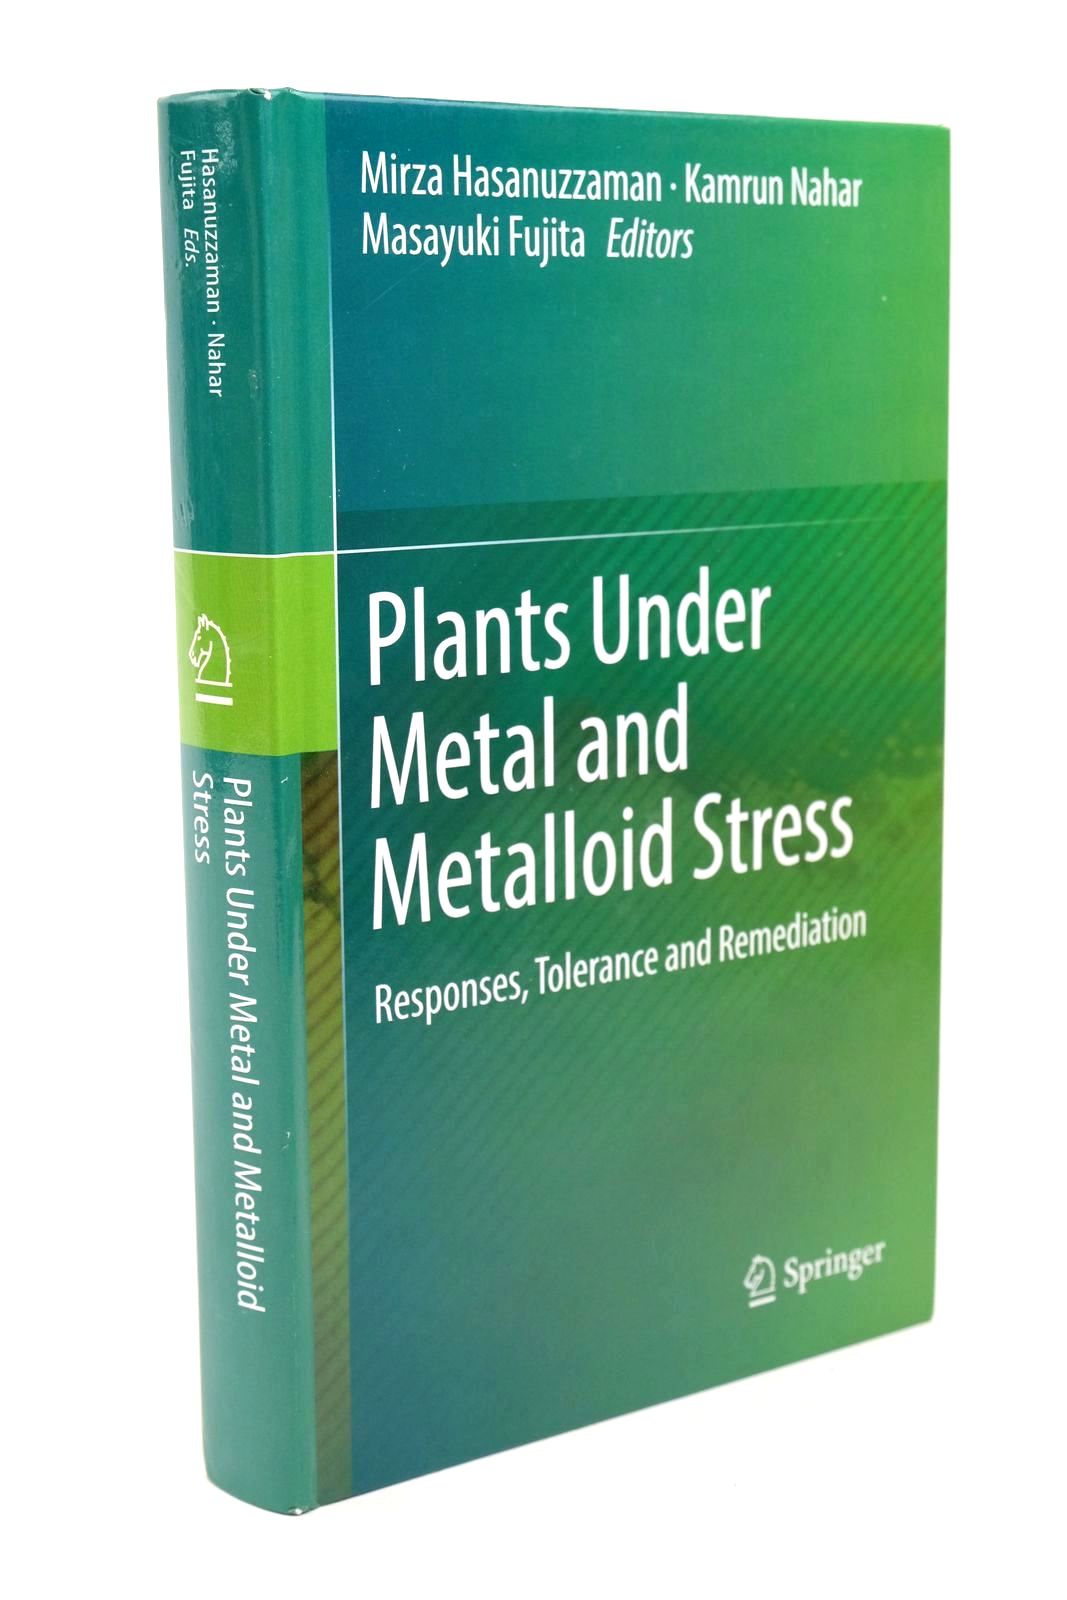 Photo of PLANTS UNDER METAL AND METALLOID STRESS written by Hasanuzzaman, Mirza Nahar, Kamrun Fujita, Masayuki published by Springer (STOCK CODE: 1323038)  for sale by Stella & Rose's Books